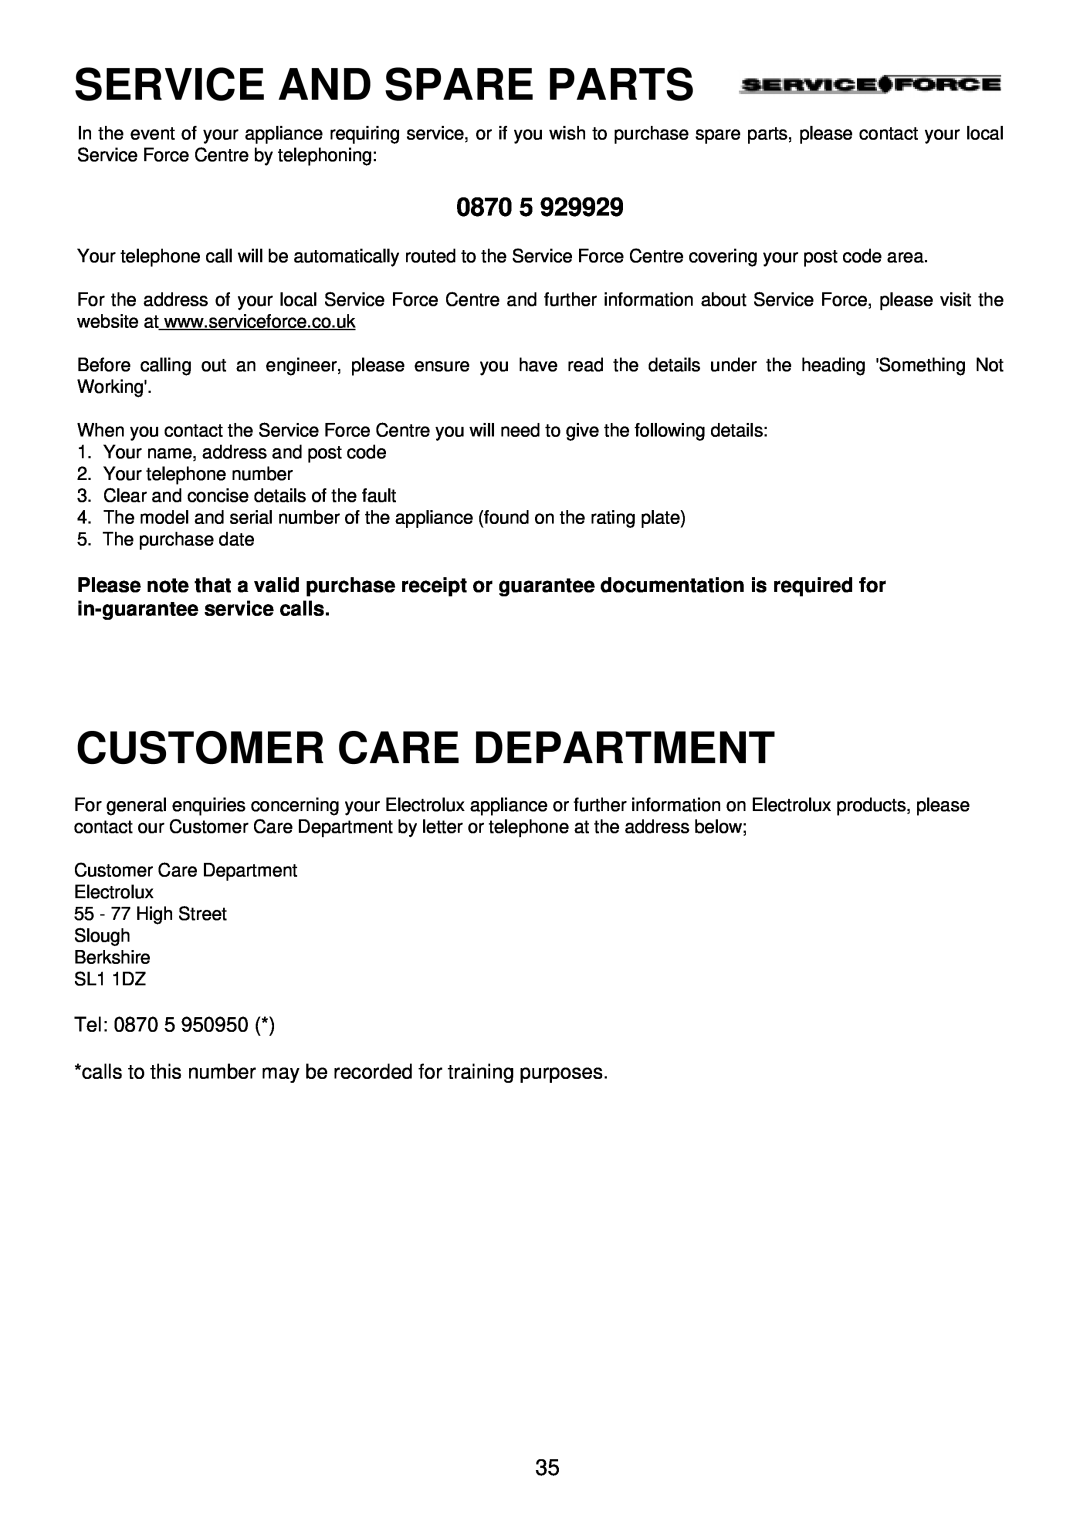 Electrolux EDB 876 manual 0870, Service And Spare Parts, Customer Care Department 